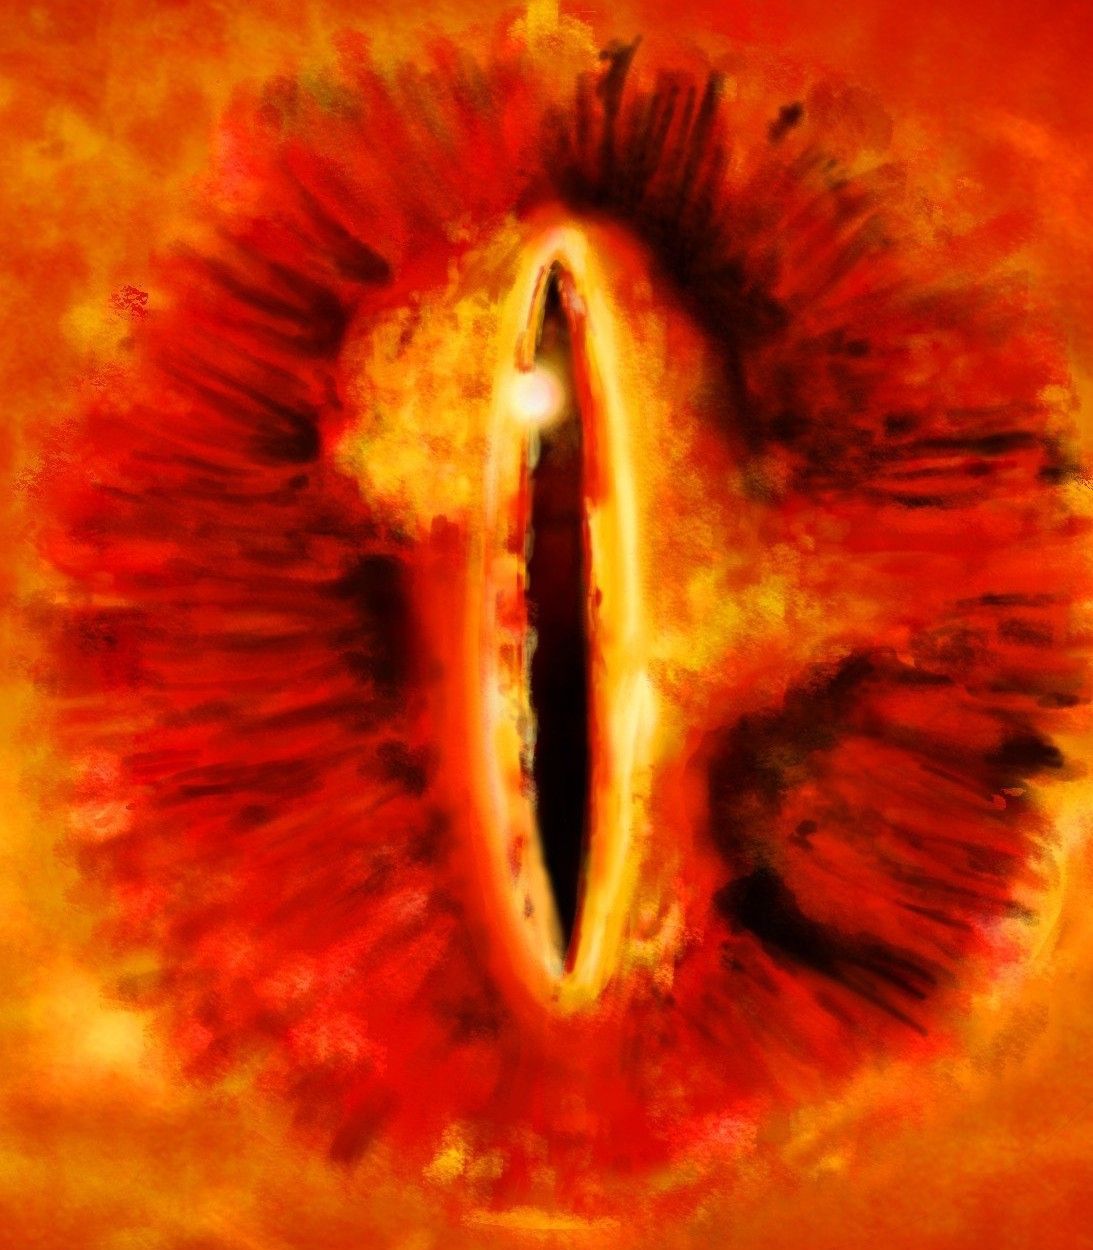 Sauron Eye in Lord of the Rings